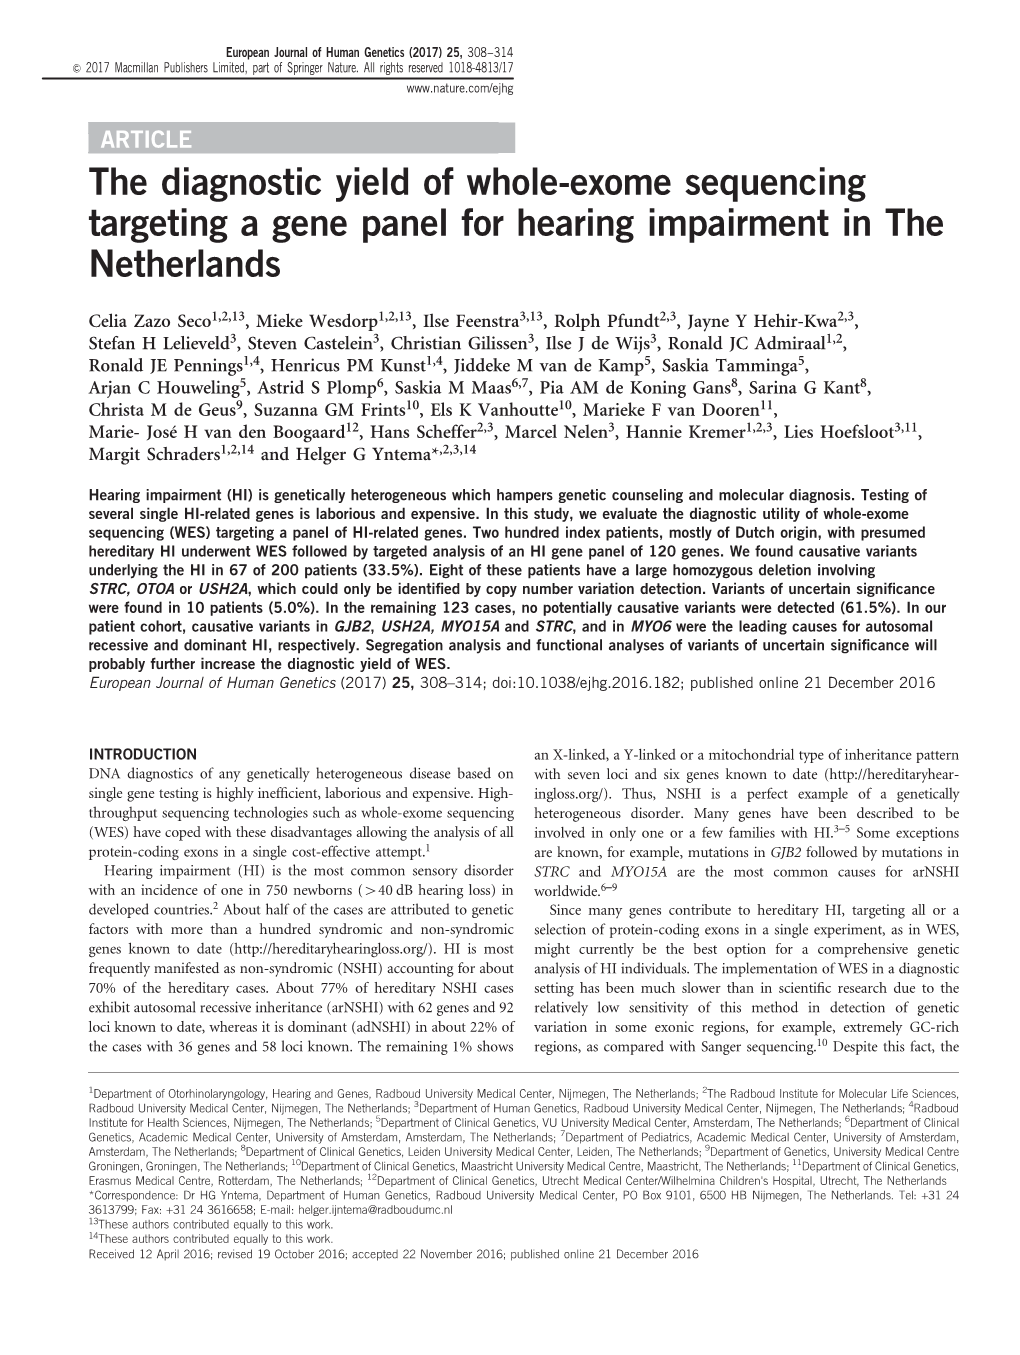 The Diagnostic Yield of Whole-Exome Sequencing Targeting a Gene Panel for Hearing Impairment in the Netherlands